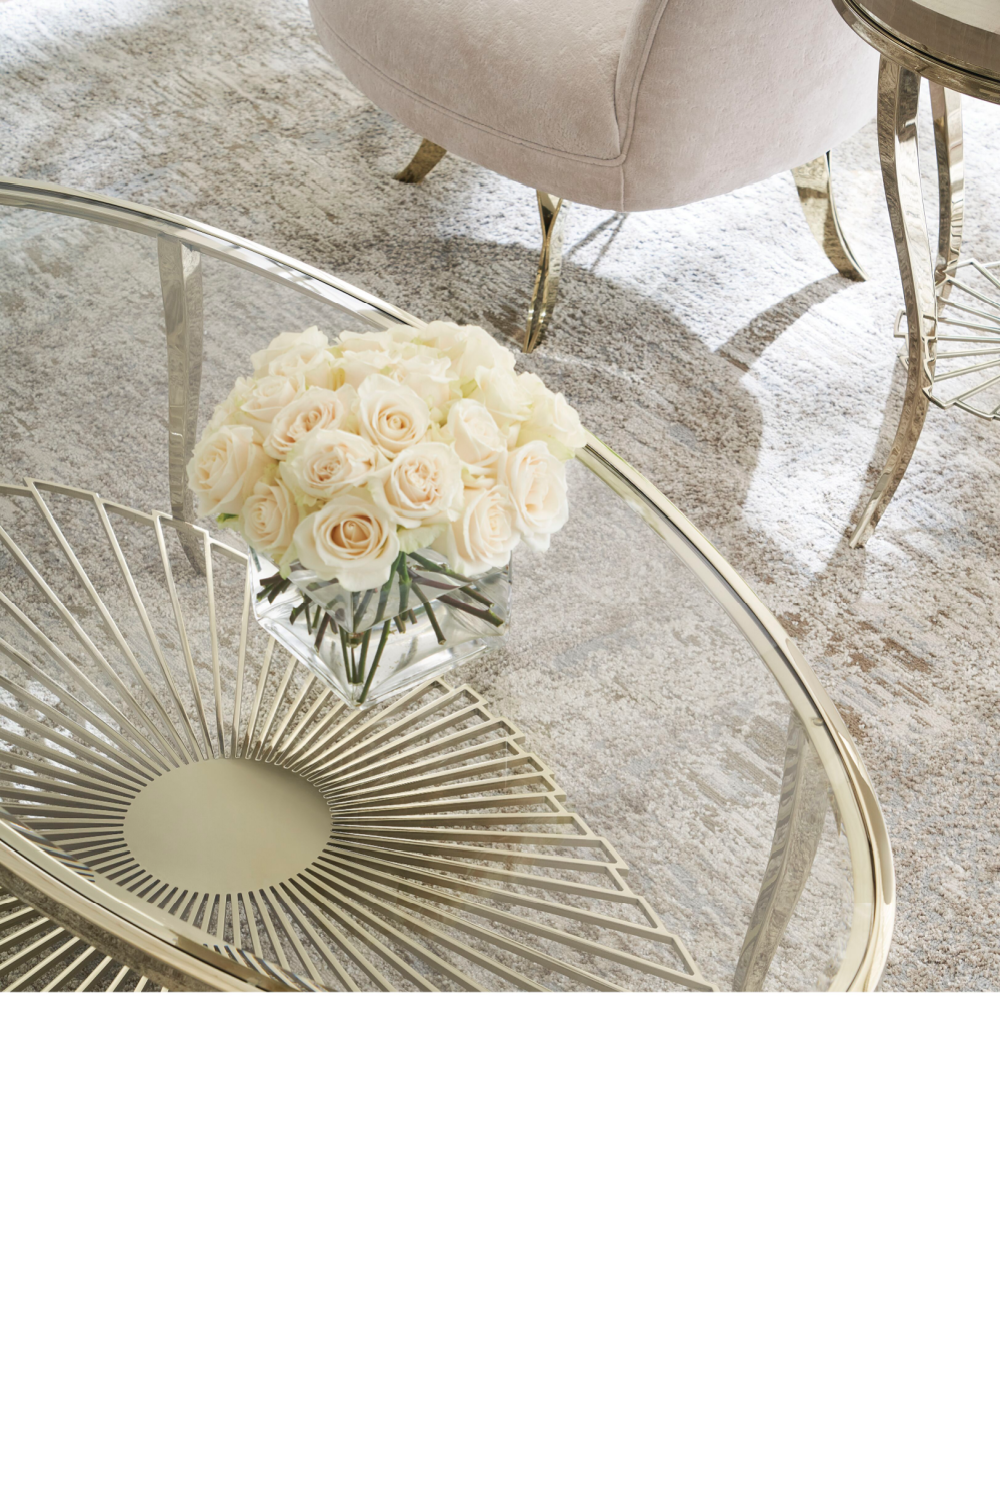 Oval Glass Cocktail Table | Caracole Pirouette | Oroa.com